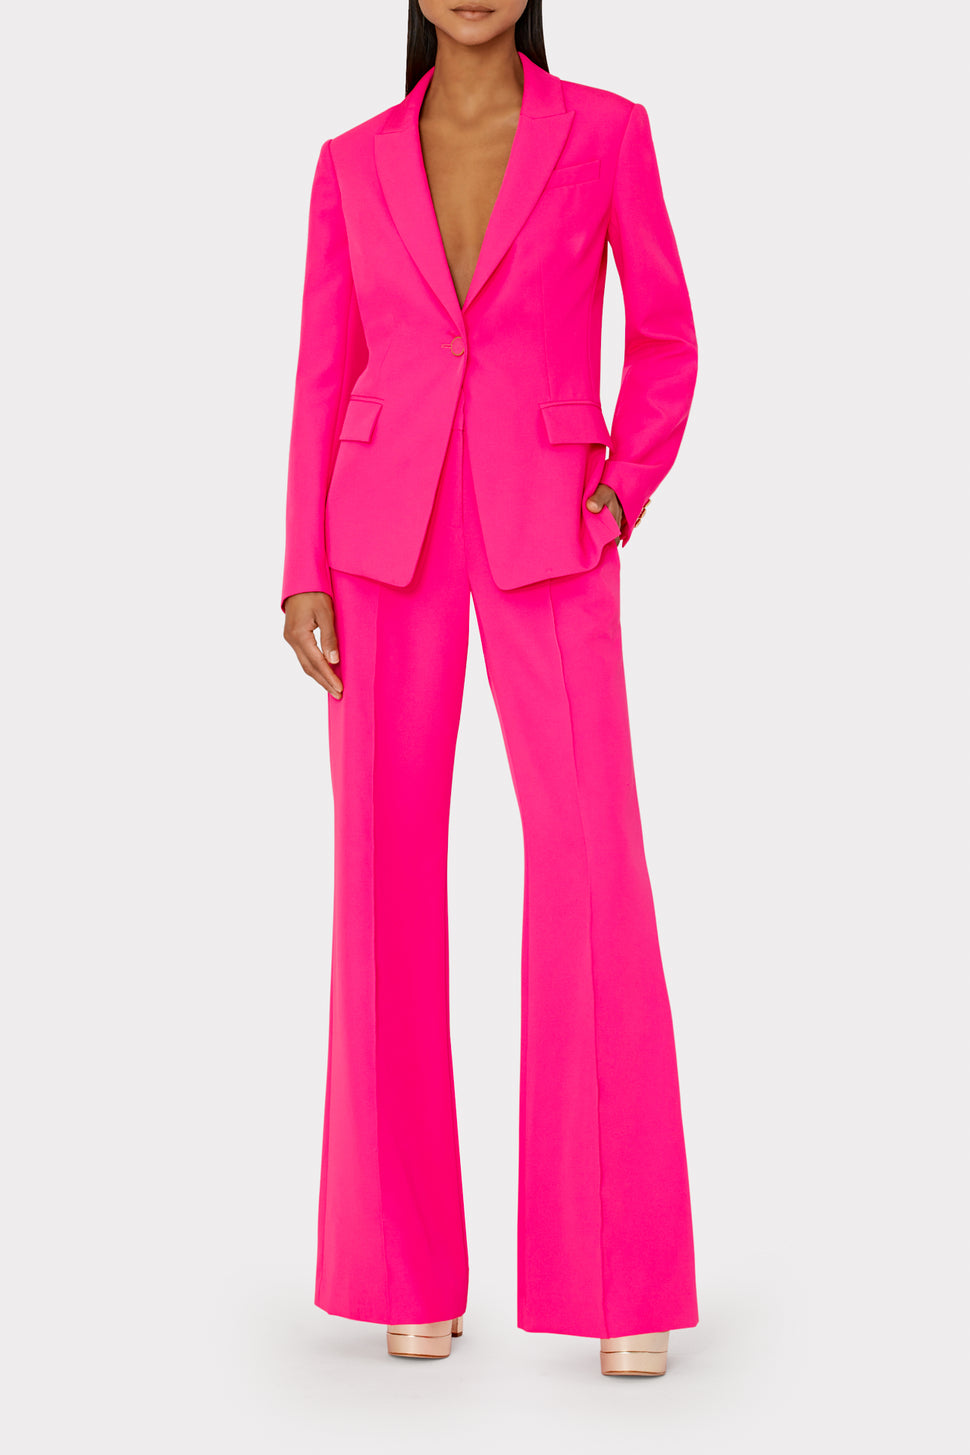 Downing Dress Pants - Cocktail Pink